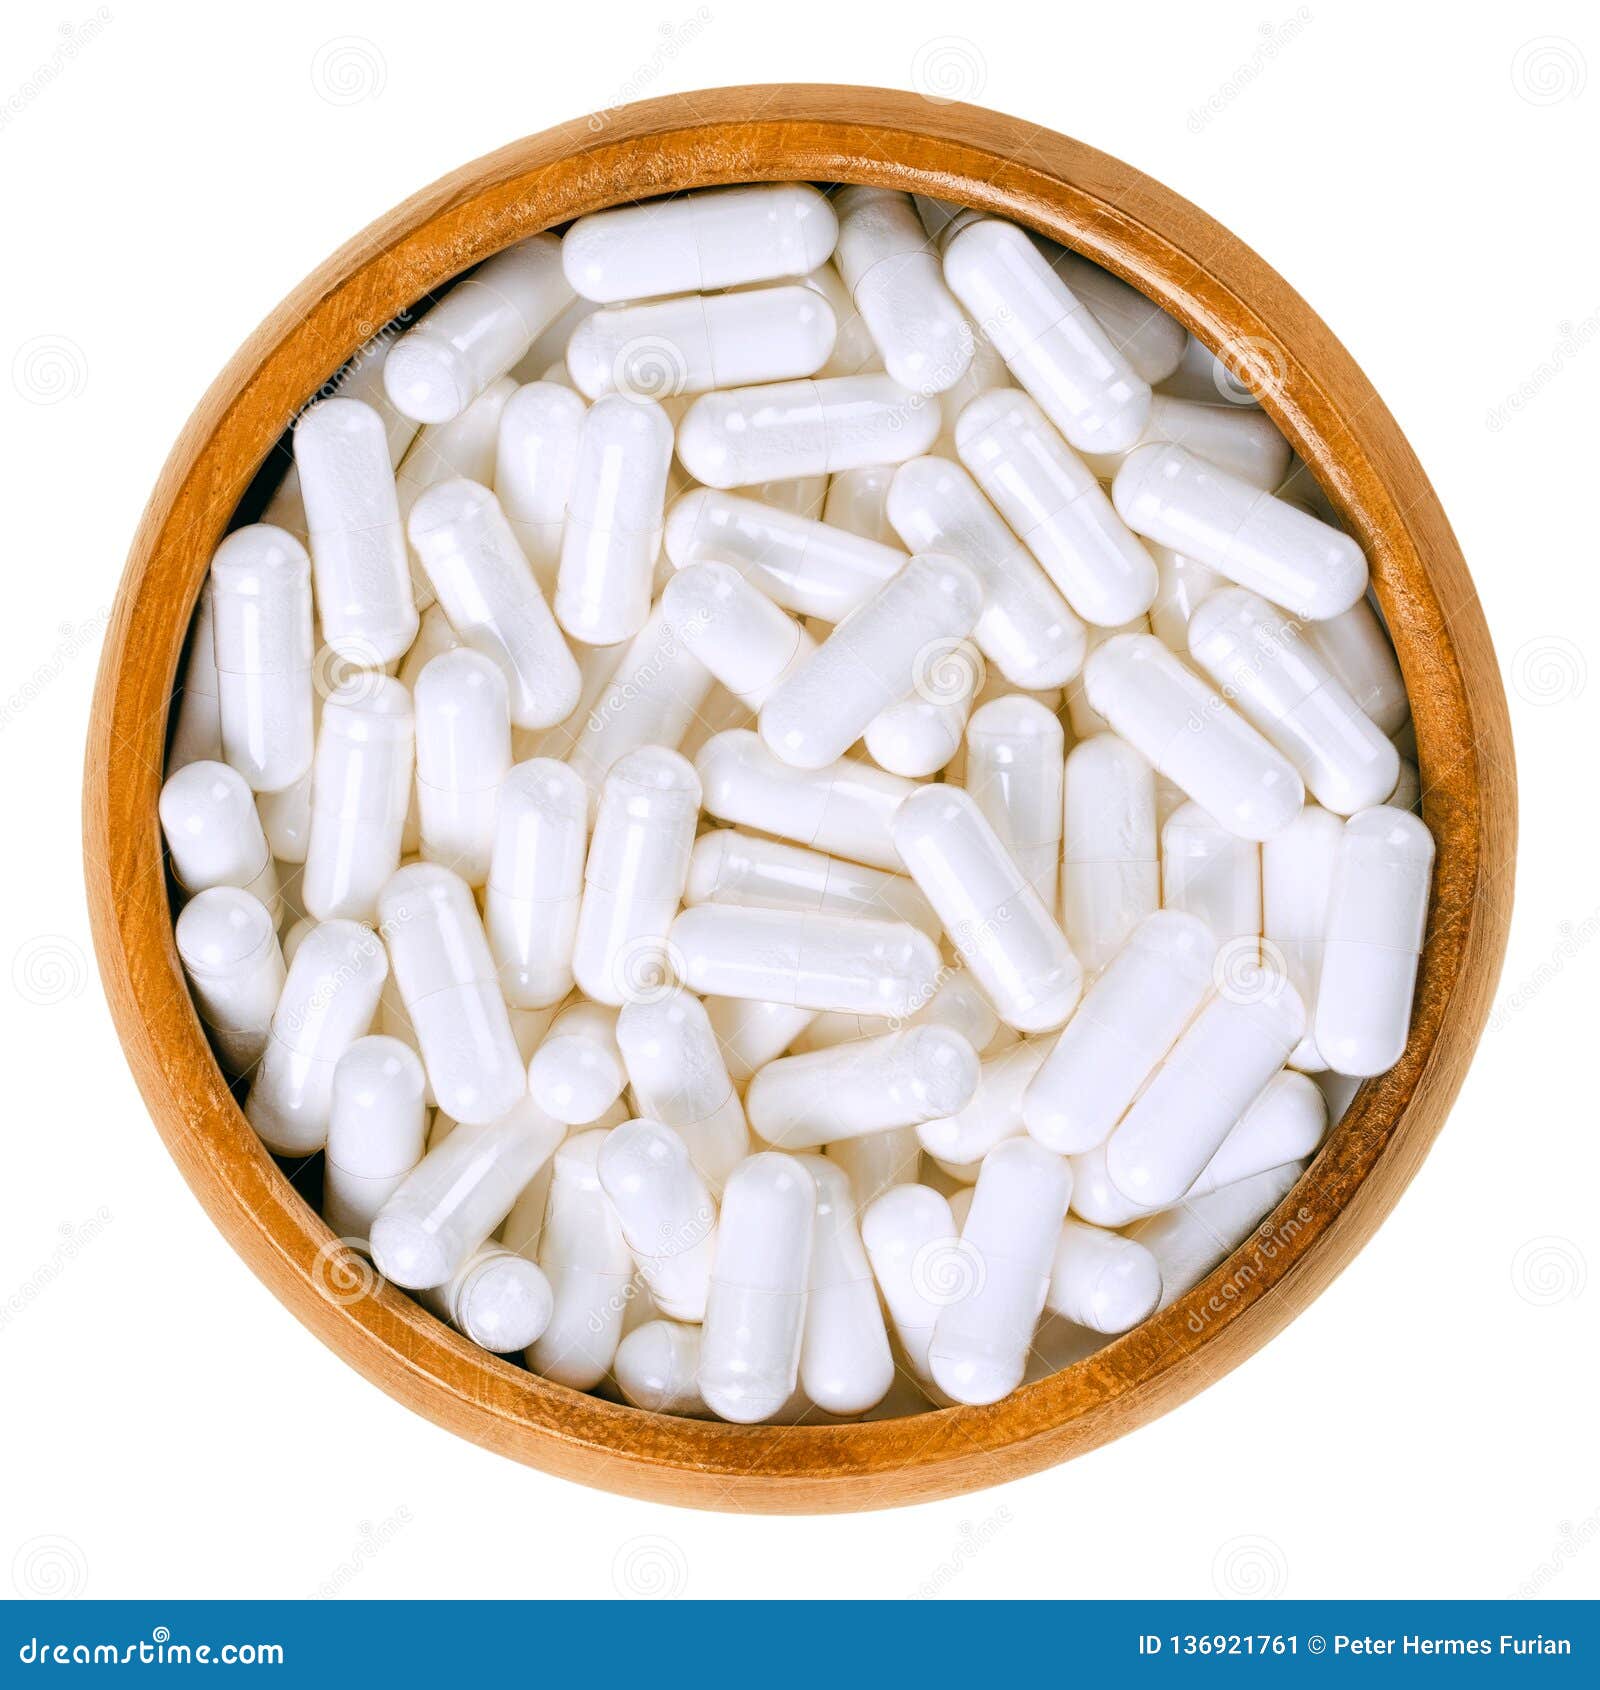 white food supplement capsules in wooden bowl over white